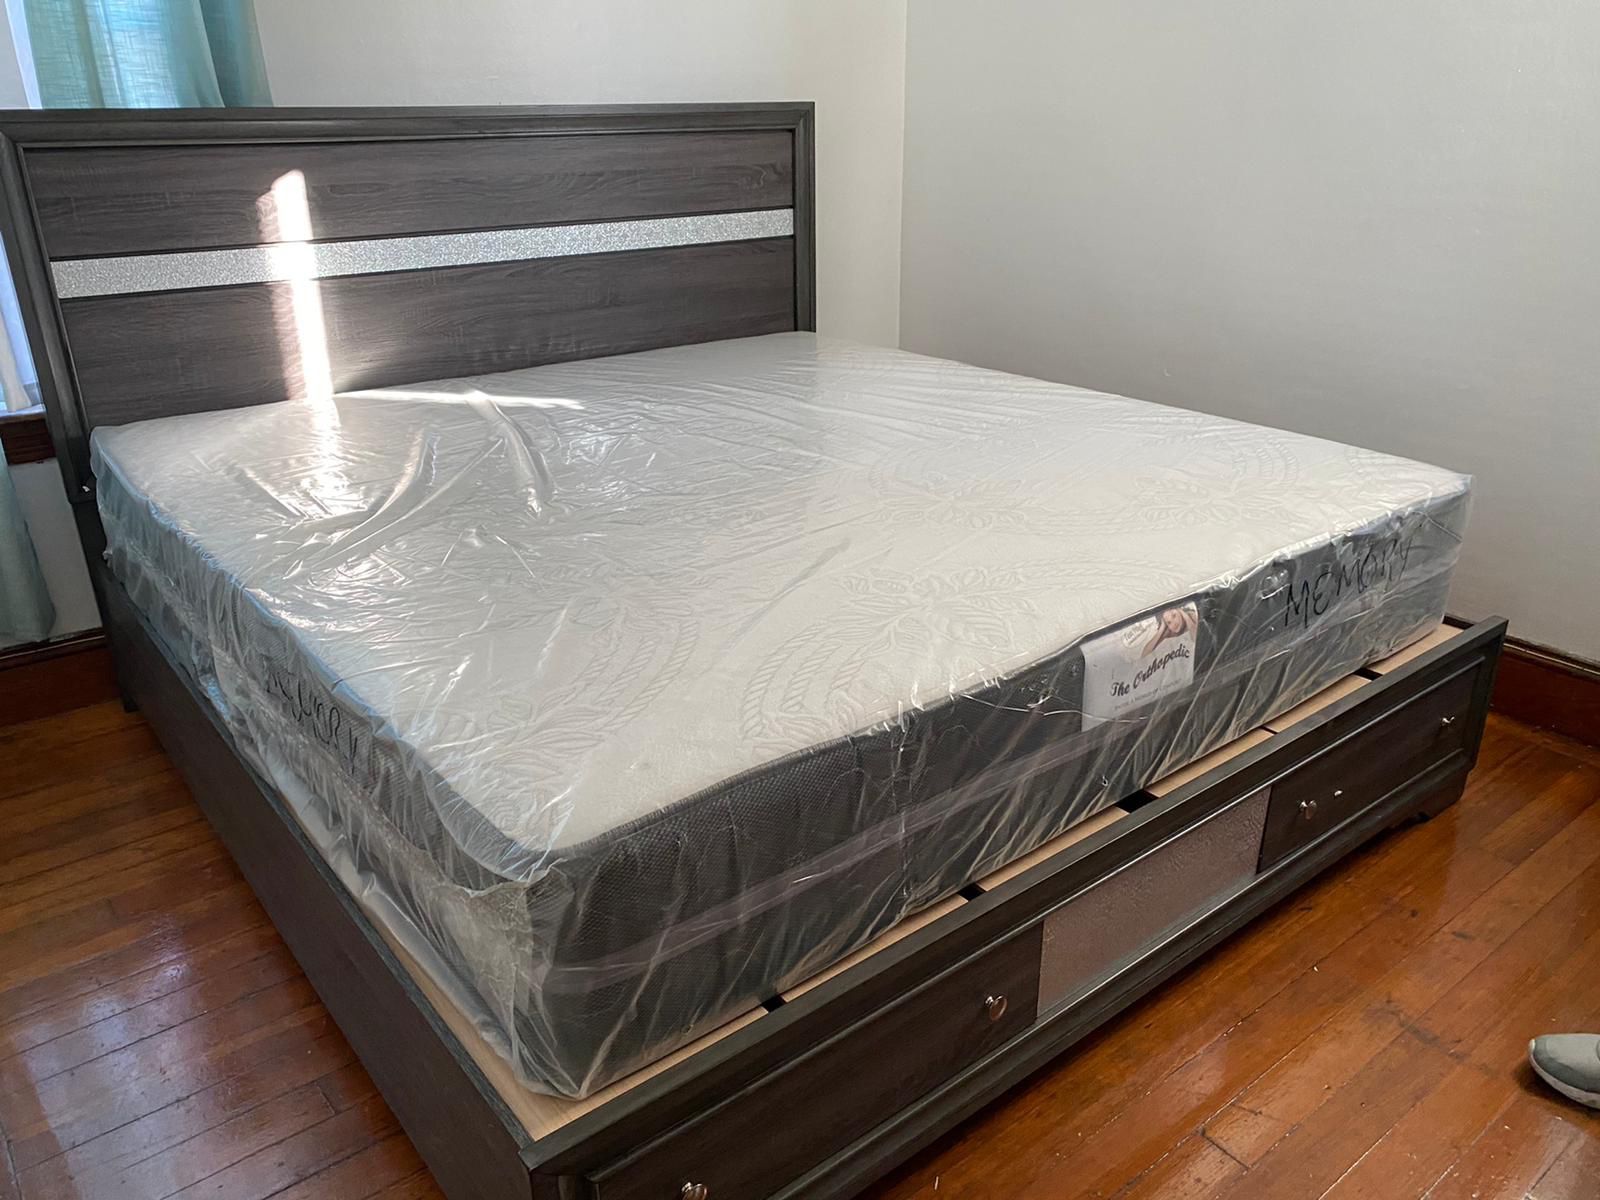 BRAN NEW KING SIZE ORTHOPEDIC MEMORY FOAM MATTRESS AND BOXSPRING FOR SALE , BED FRAME NO INCLUDED > NO CREDIT NEEDED